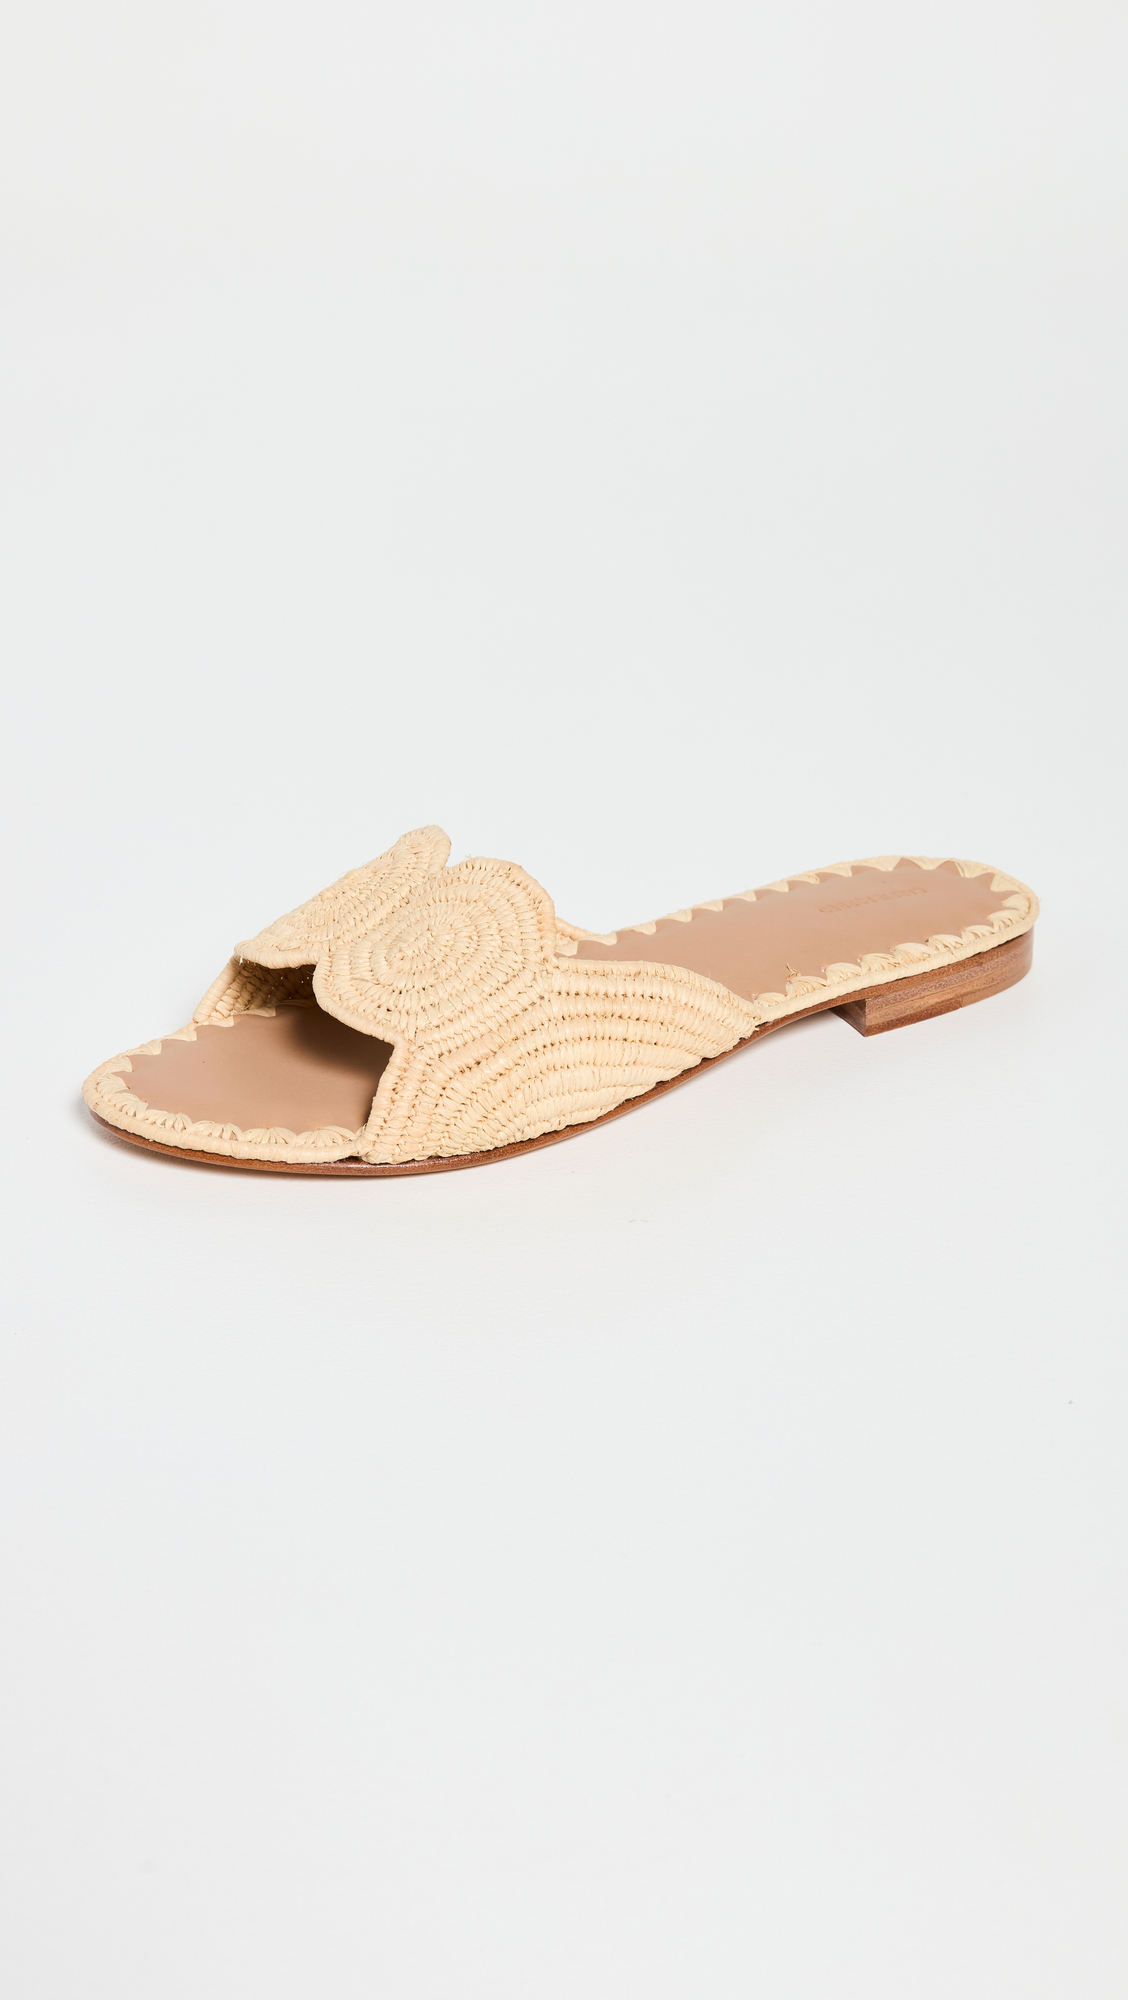 The 24 Best Slide Sandals for Women That Look So Chic | Who What Wear